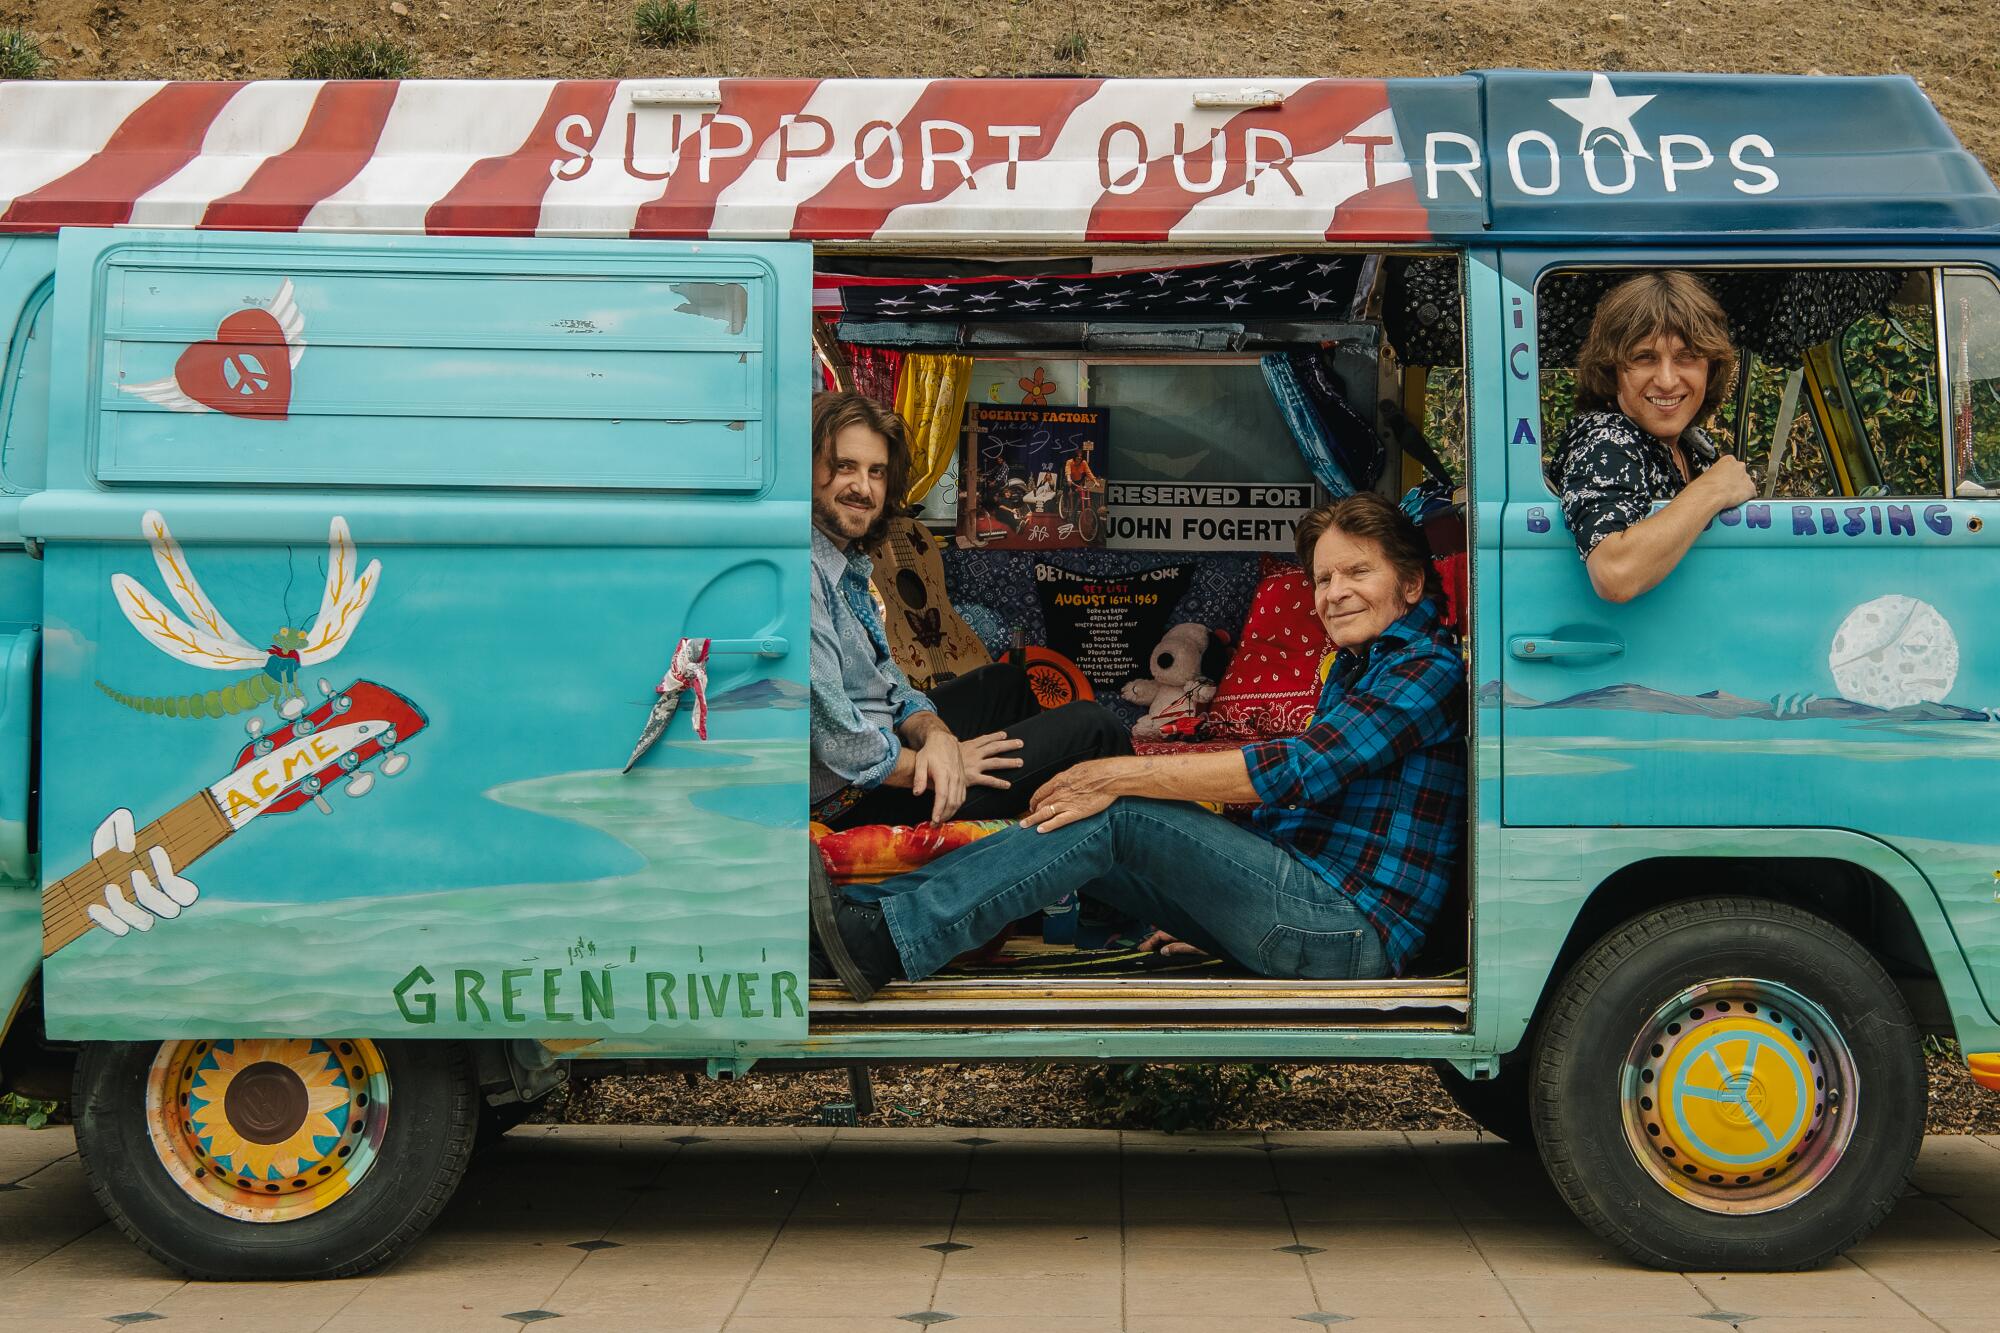 Three rock musicians in a customized old van